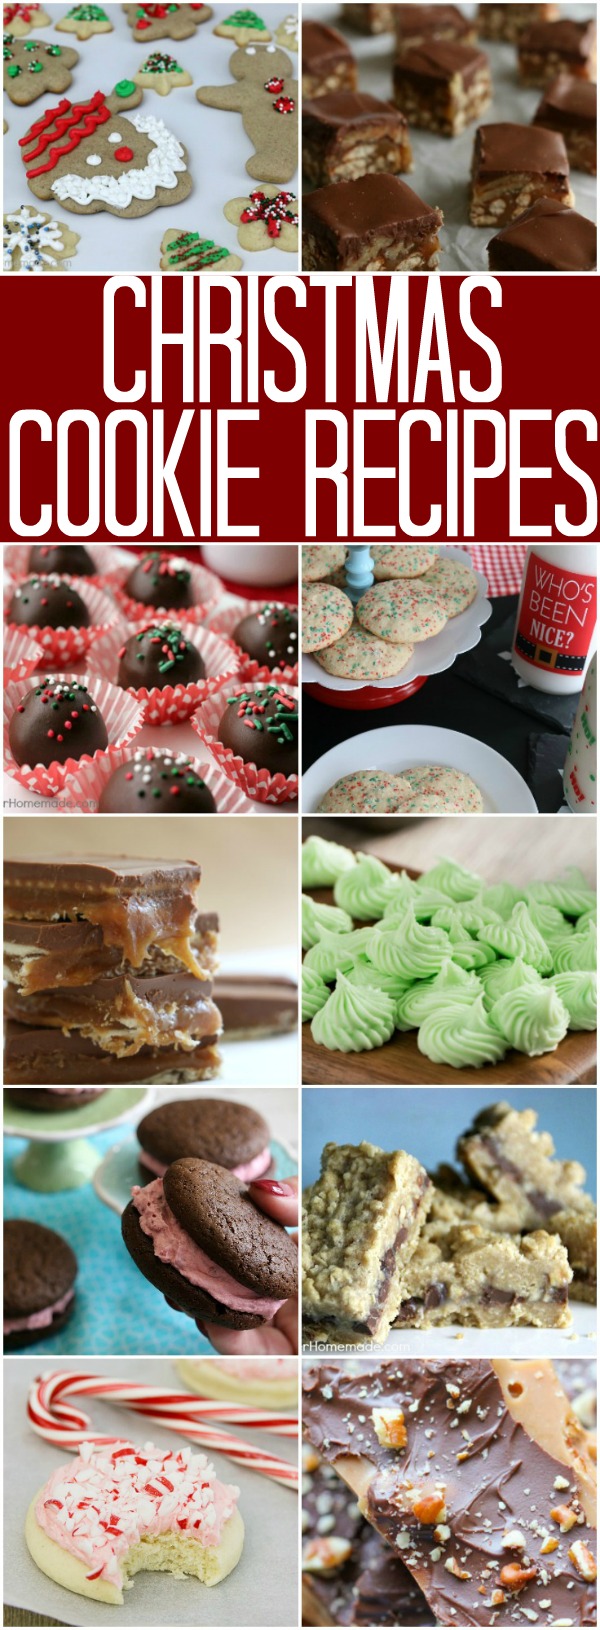 CHRISTMAS COOKIE RECIPES